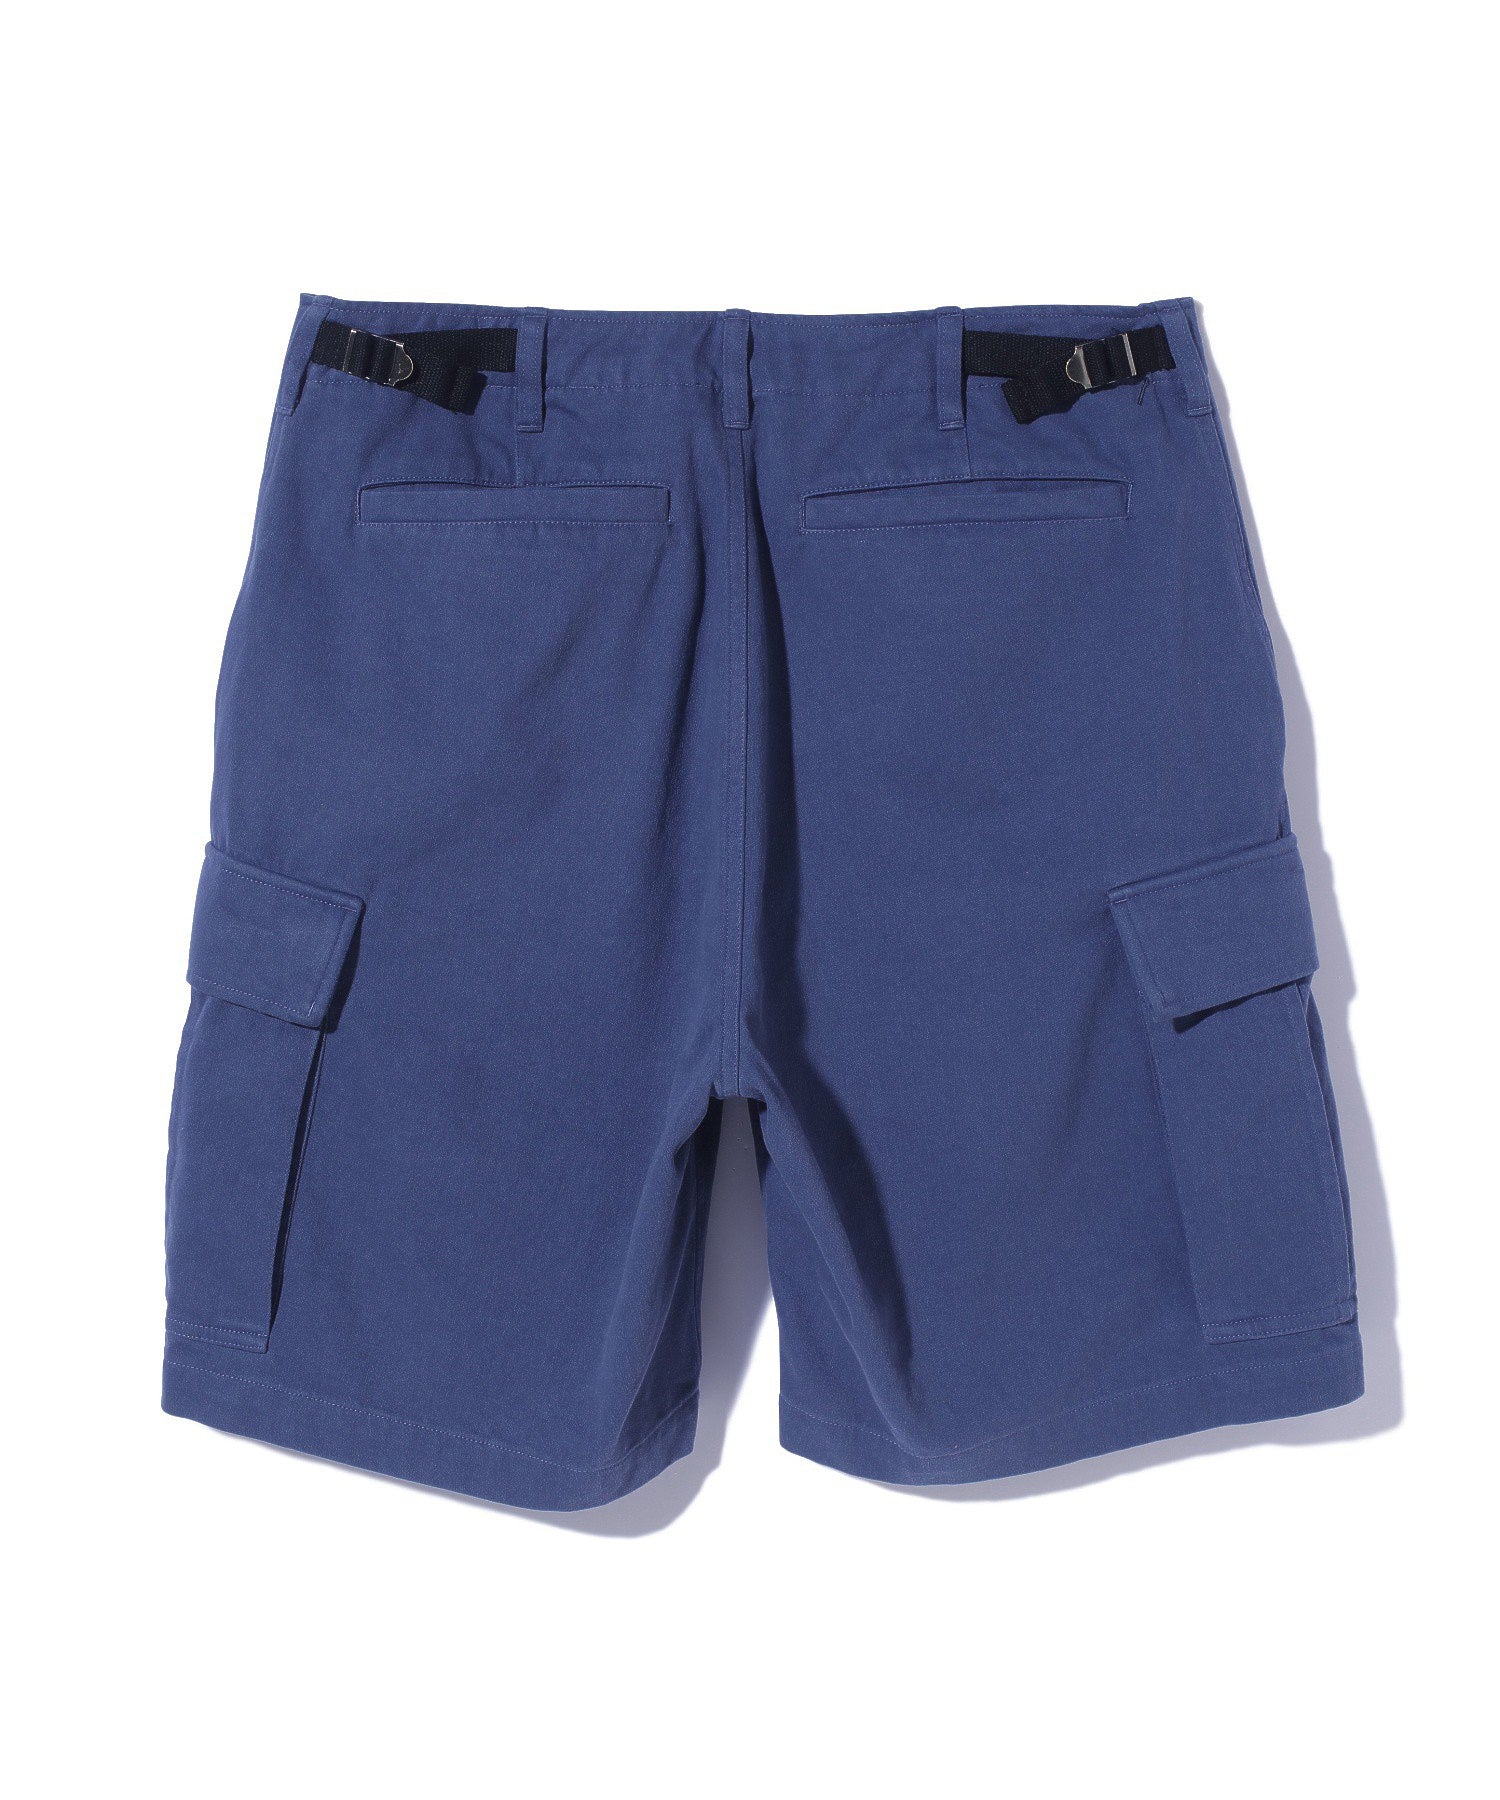 EMBROIDERED LOGO CARGO SHORT PANTS